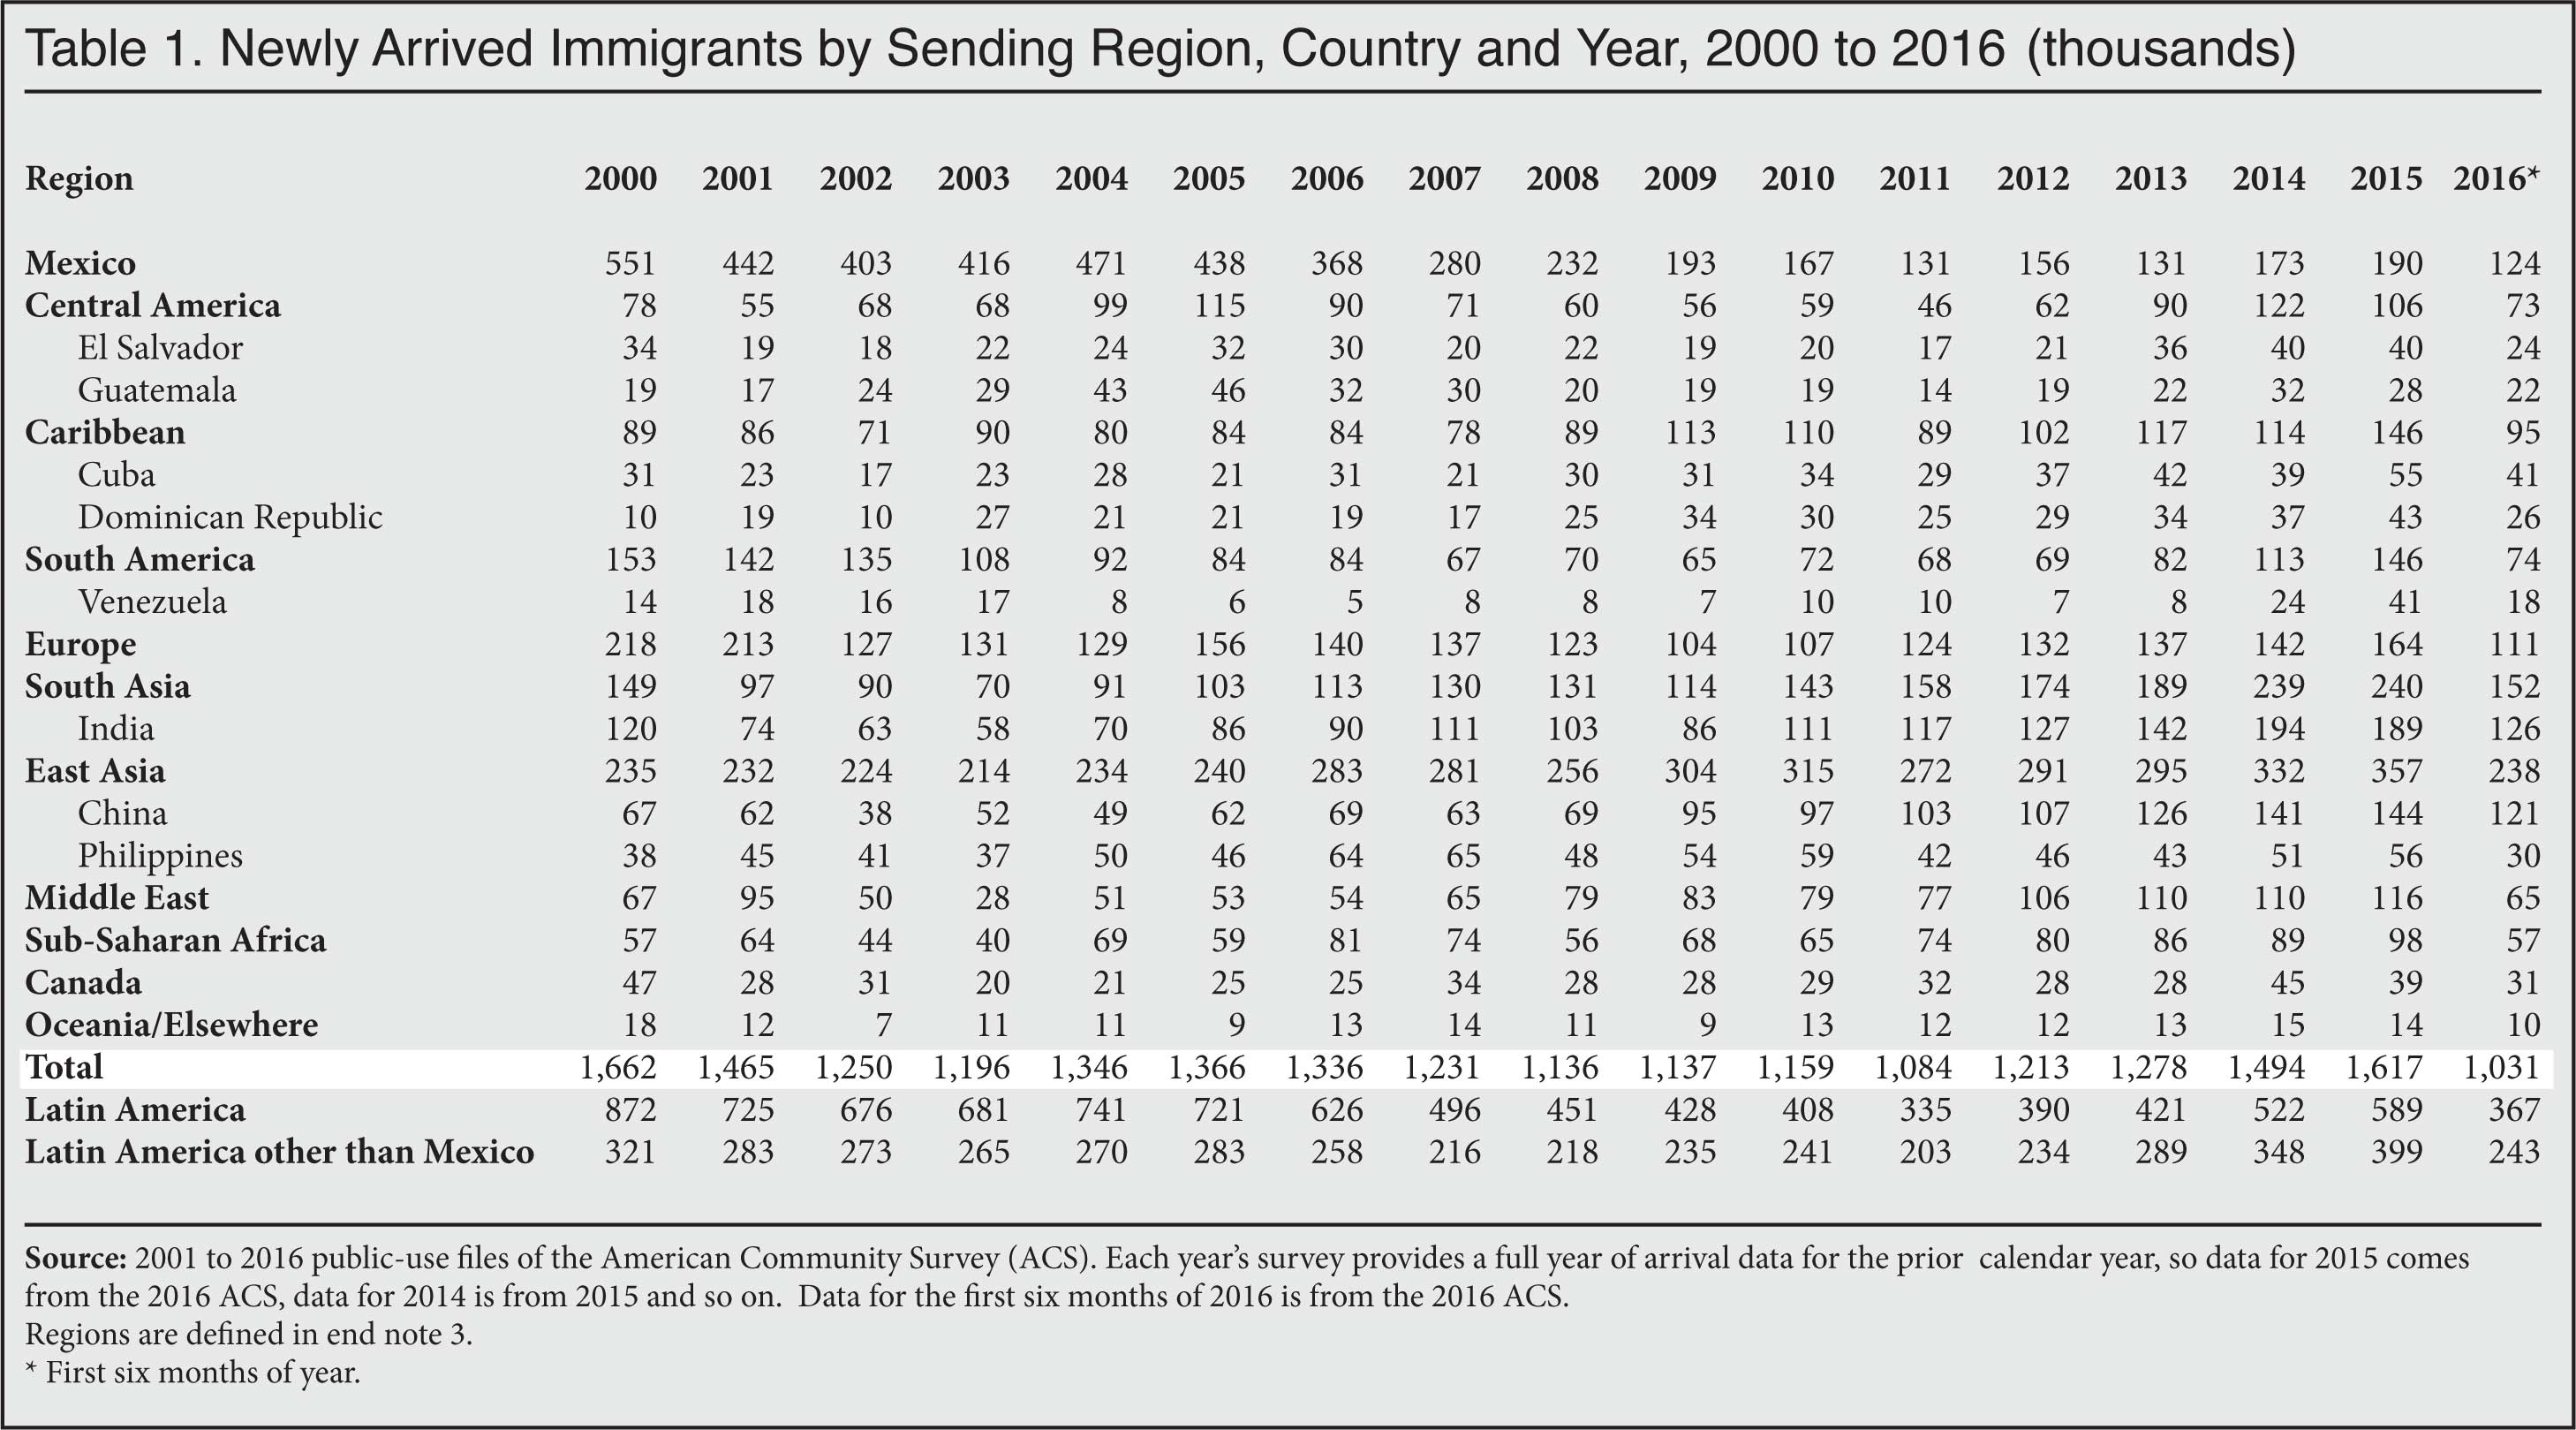 Table: Newly arrived immigrants by sending region, country and year, 2000 to 2016